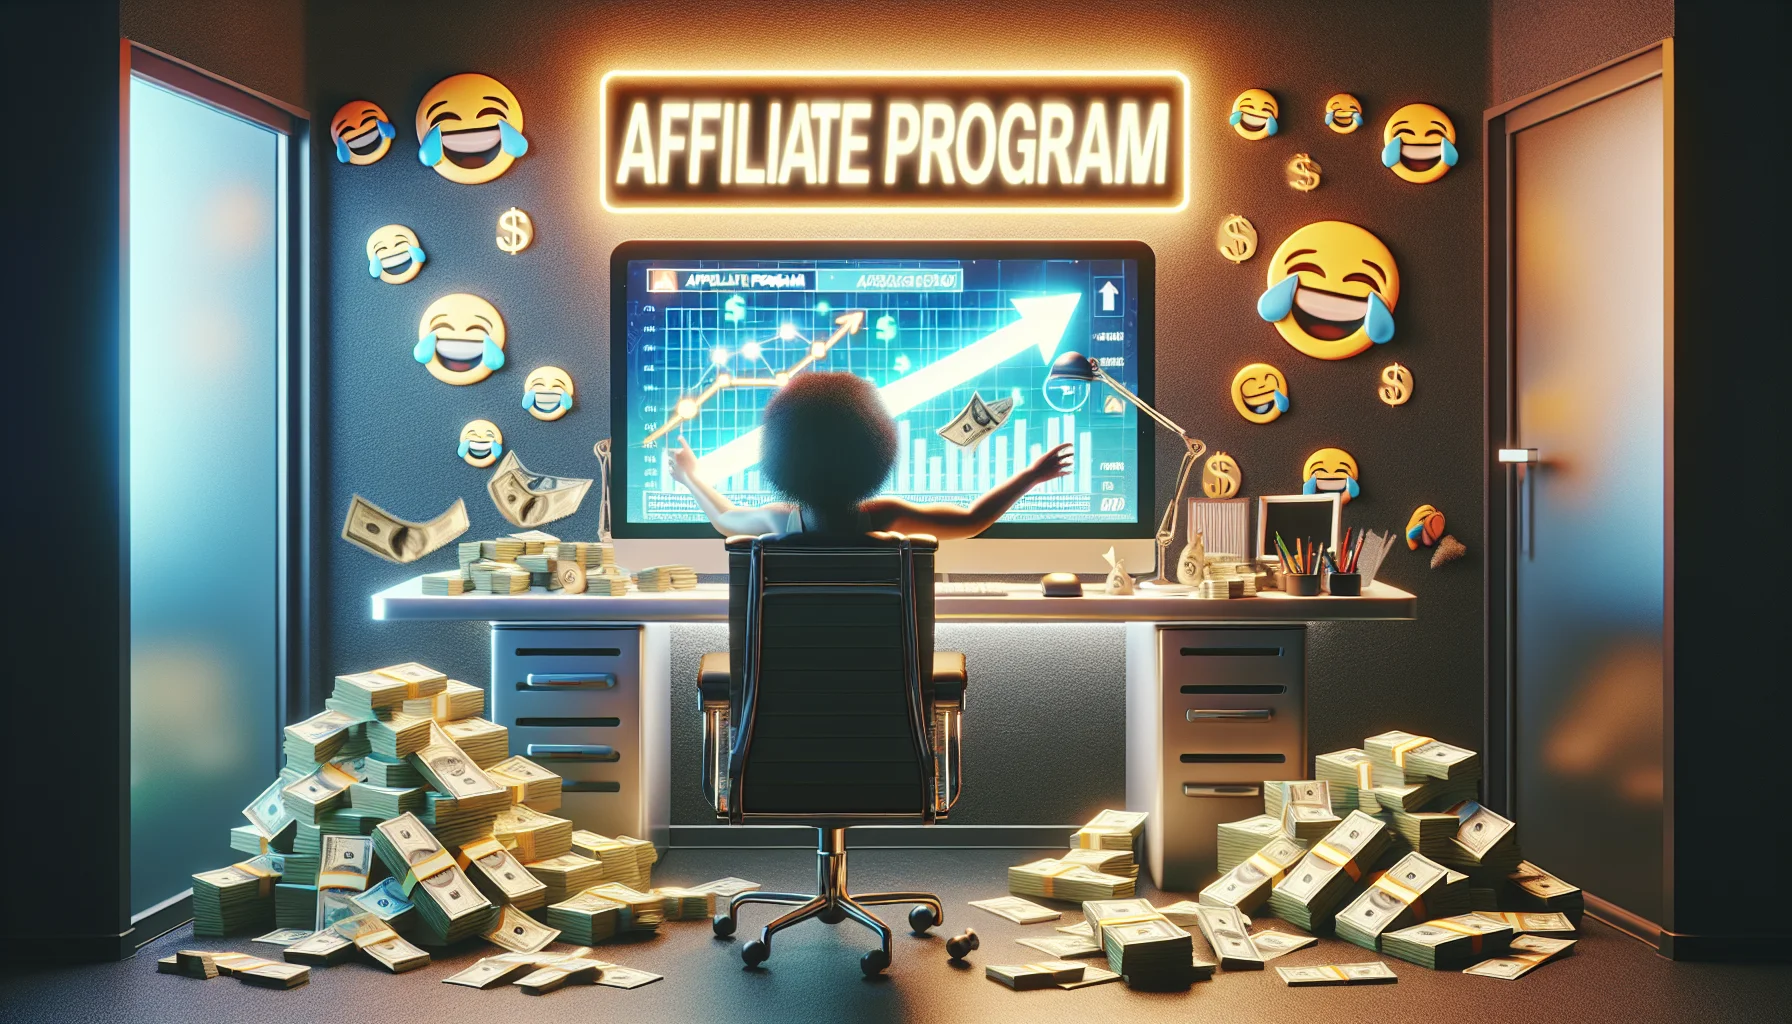 Visualize a humorous realistic scene relating to an online money-making platform affiliate program. Picture a person sitting at an ultra-modern, sleek computer station. The screen displays a montage of dollar symbols, indicating the profitability of the endeavor. Their excitement is showcased by stacks of play money piling up around the desk and a chart with an upwards arrow on the screen. Make sure the ethnicity of the person is Black and the gender is female. A neon sign above the desk says 'Affiliate Program', shining brightly amidst the laughter emoji decals on the wall.